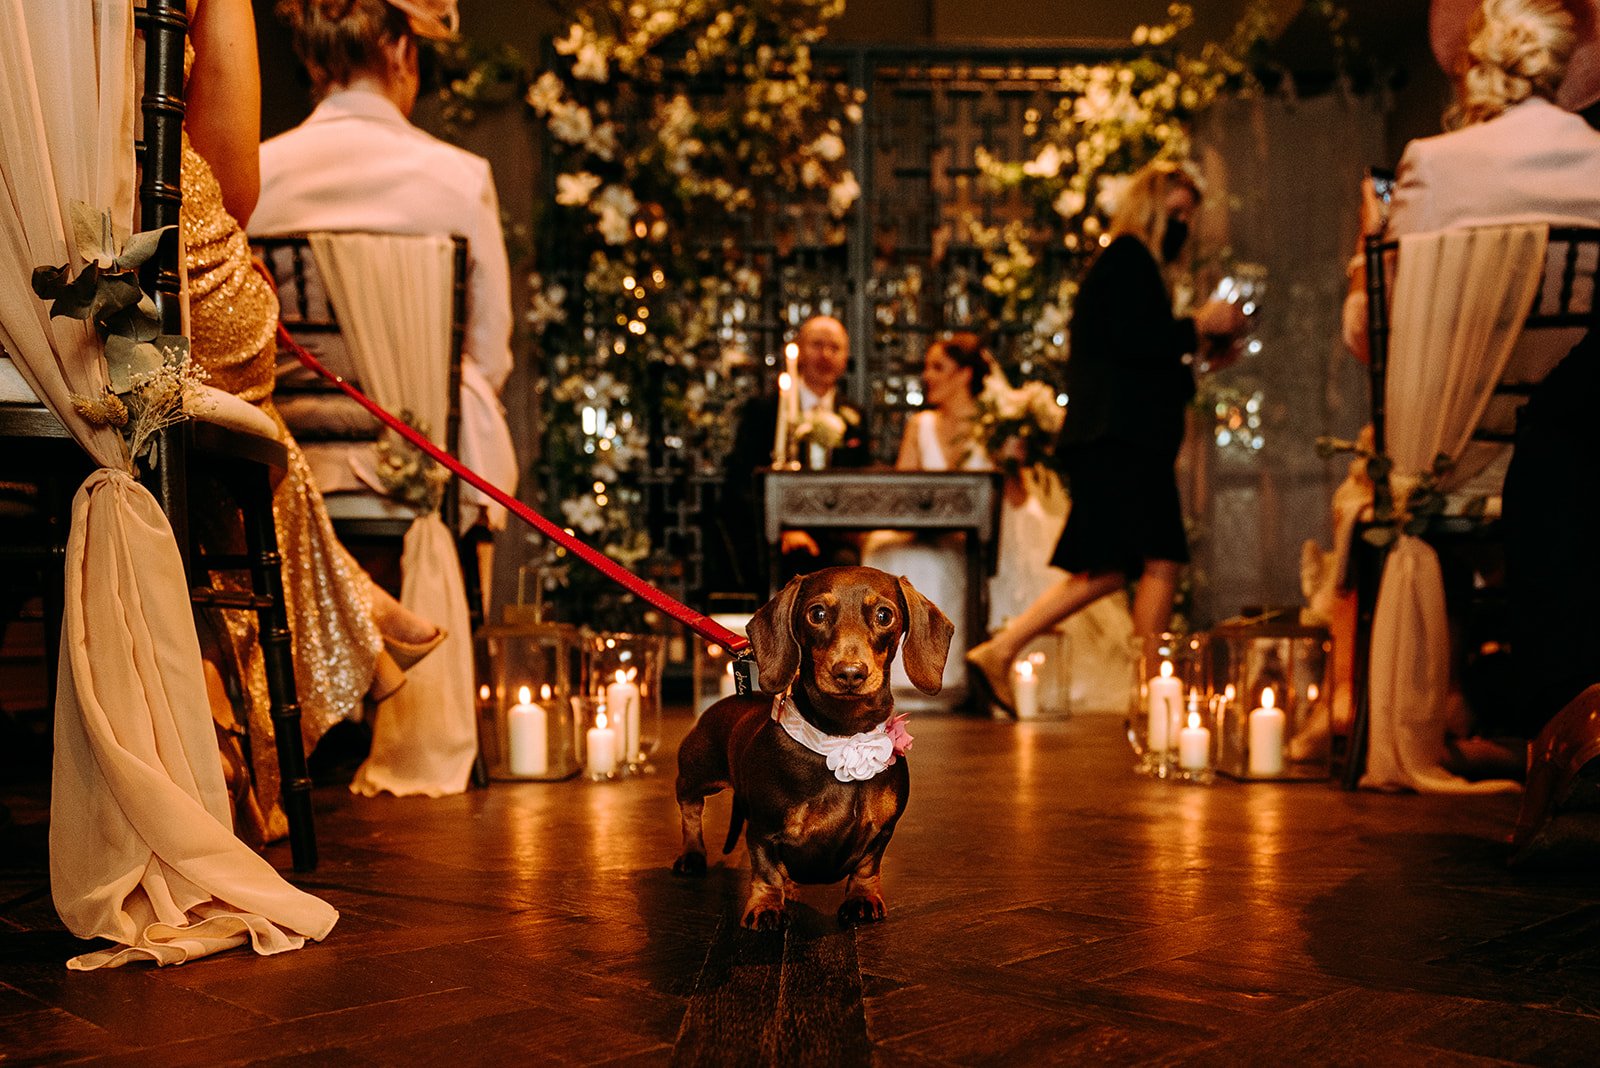 A dog at the ceremony